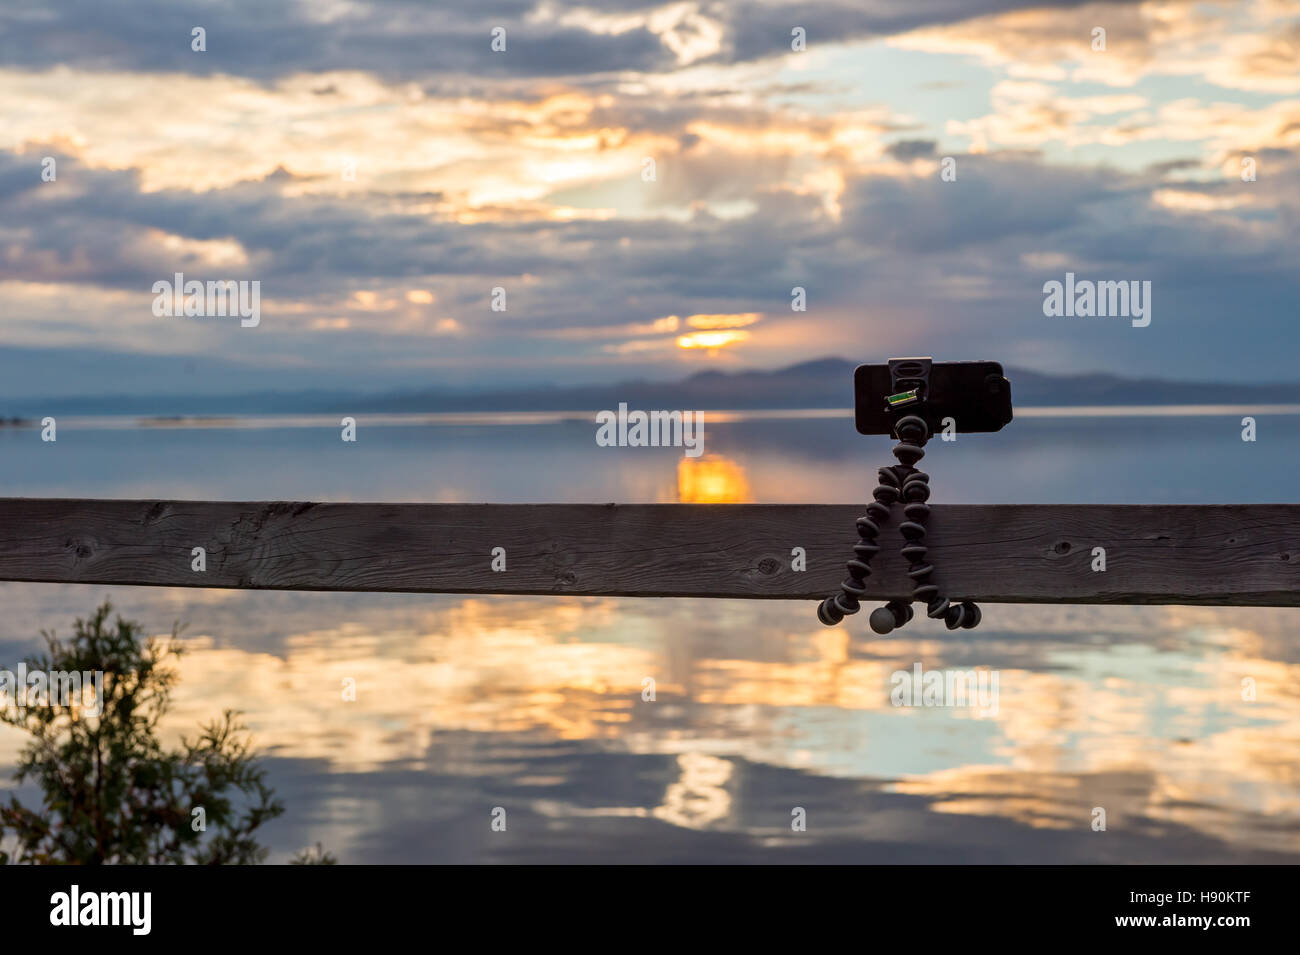 Smartphone attached on flexible tripod facing the sea at sunset Stock Photo